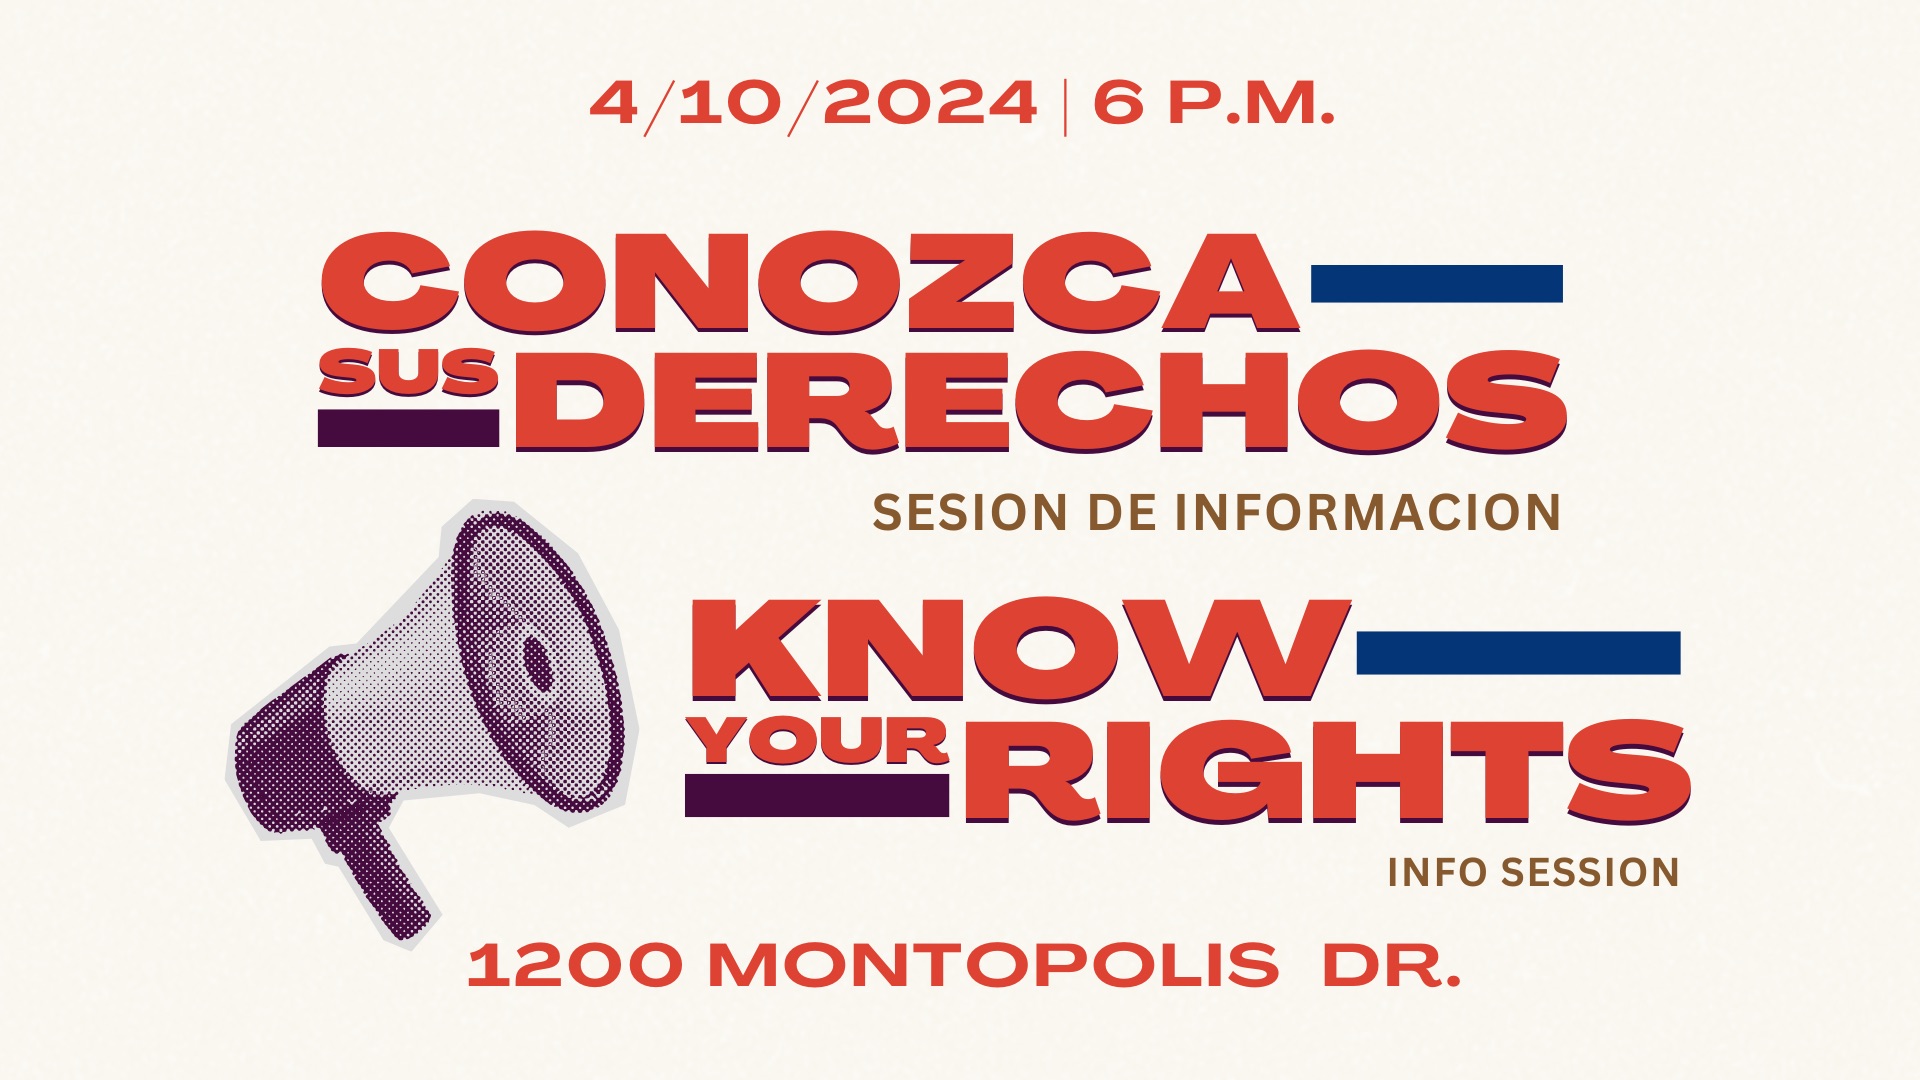 Know Your Rights Info Session